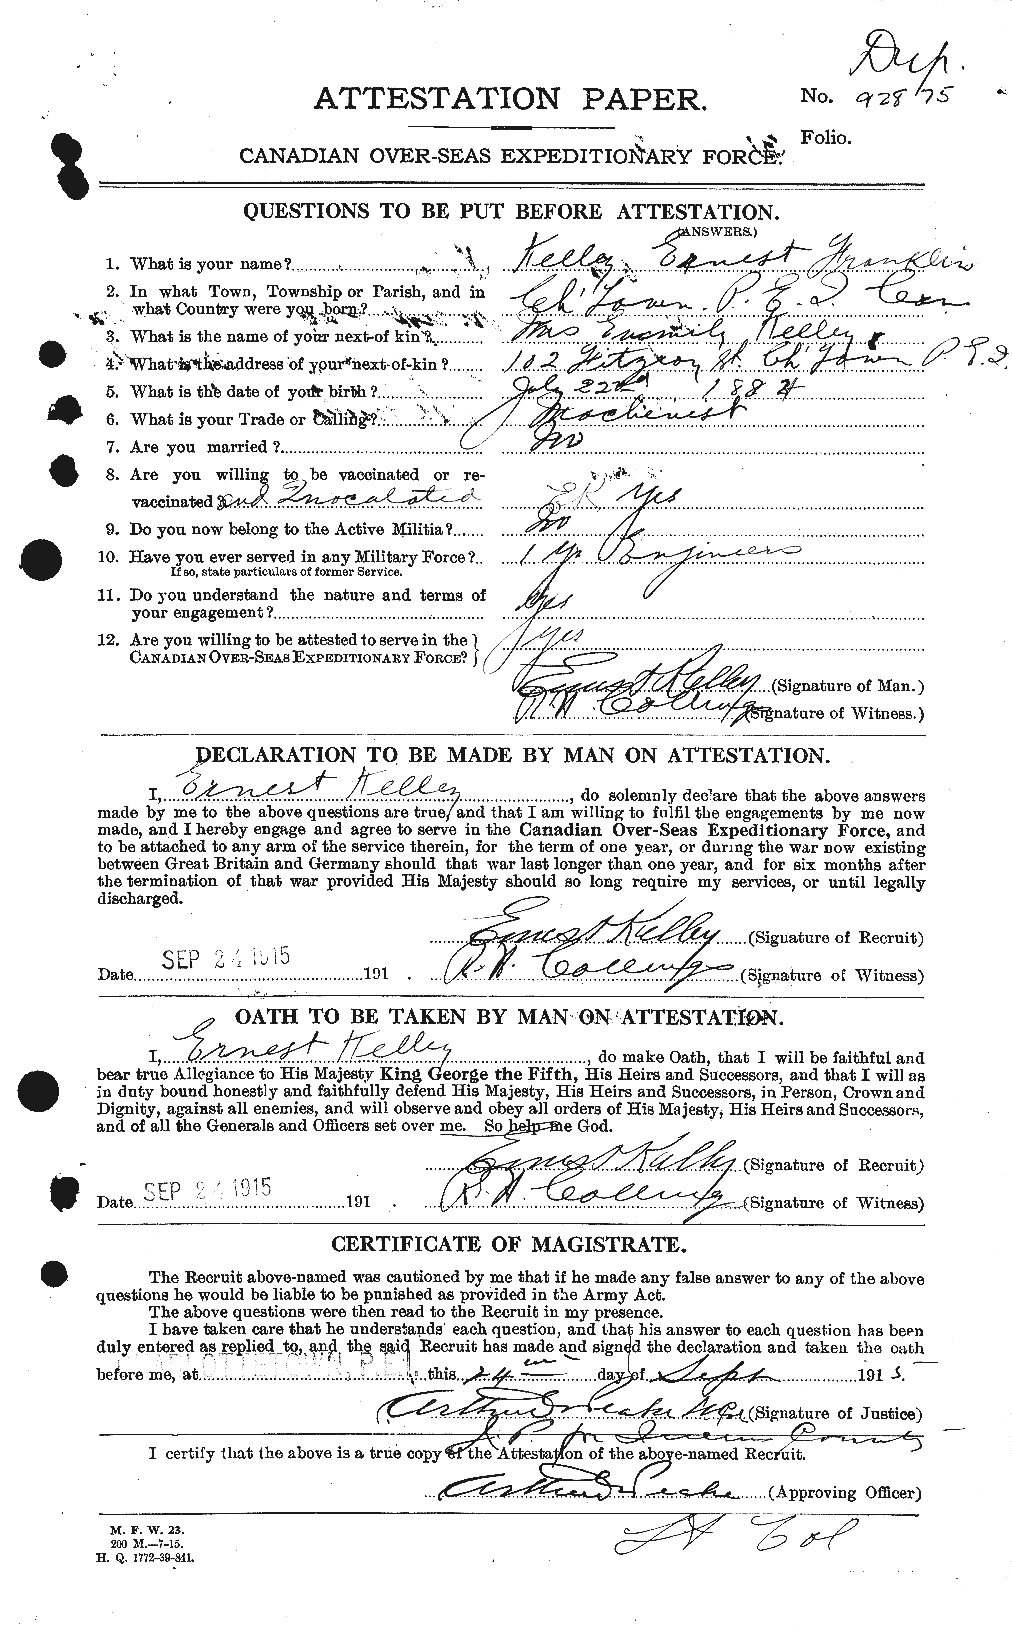 Personnel Records of the First World War - CEF 431363a